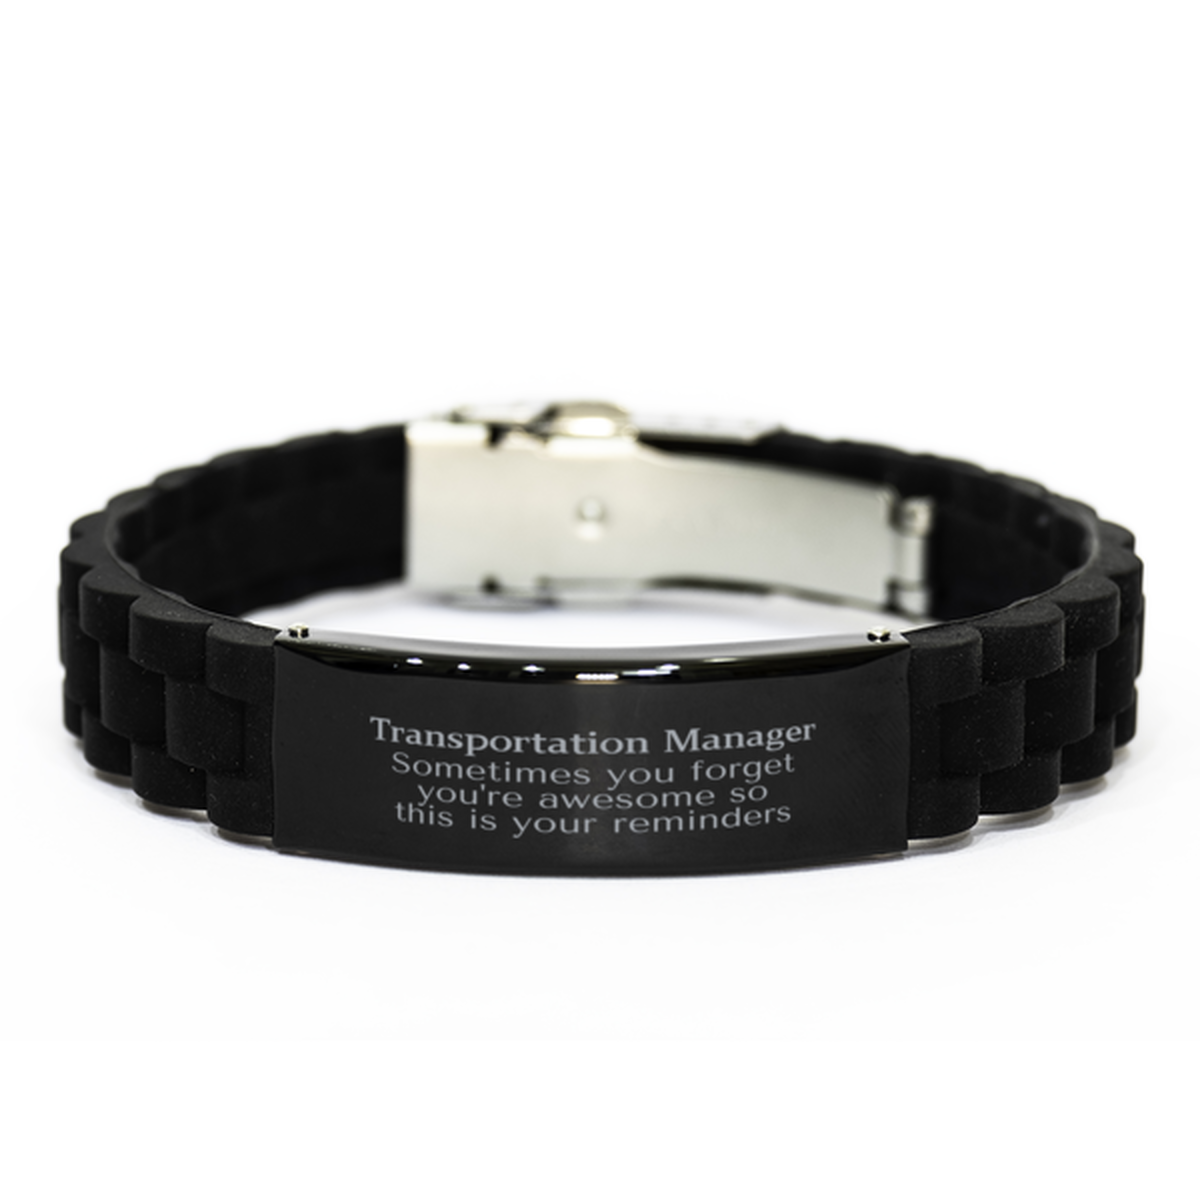 Sentimental Transportation Manager Black Glidelock Clasp Bracelet, Transportation Manager Sometimes you forget you're awesome so this is your reminders, Graduation Christmas Birthday Gifts for Transportation Manager, Men, Women, Coworkers